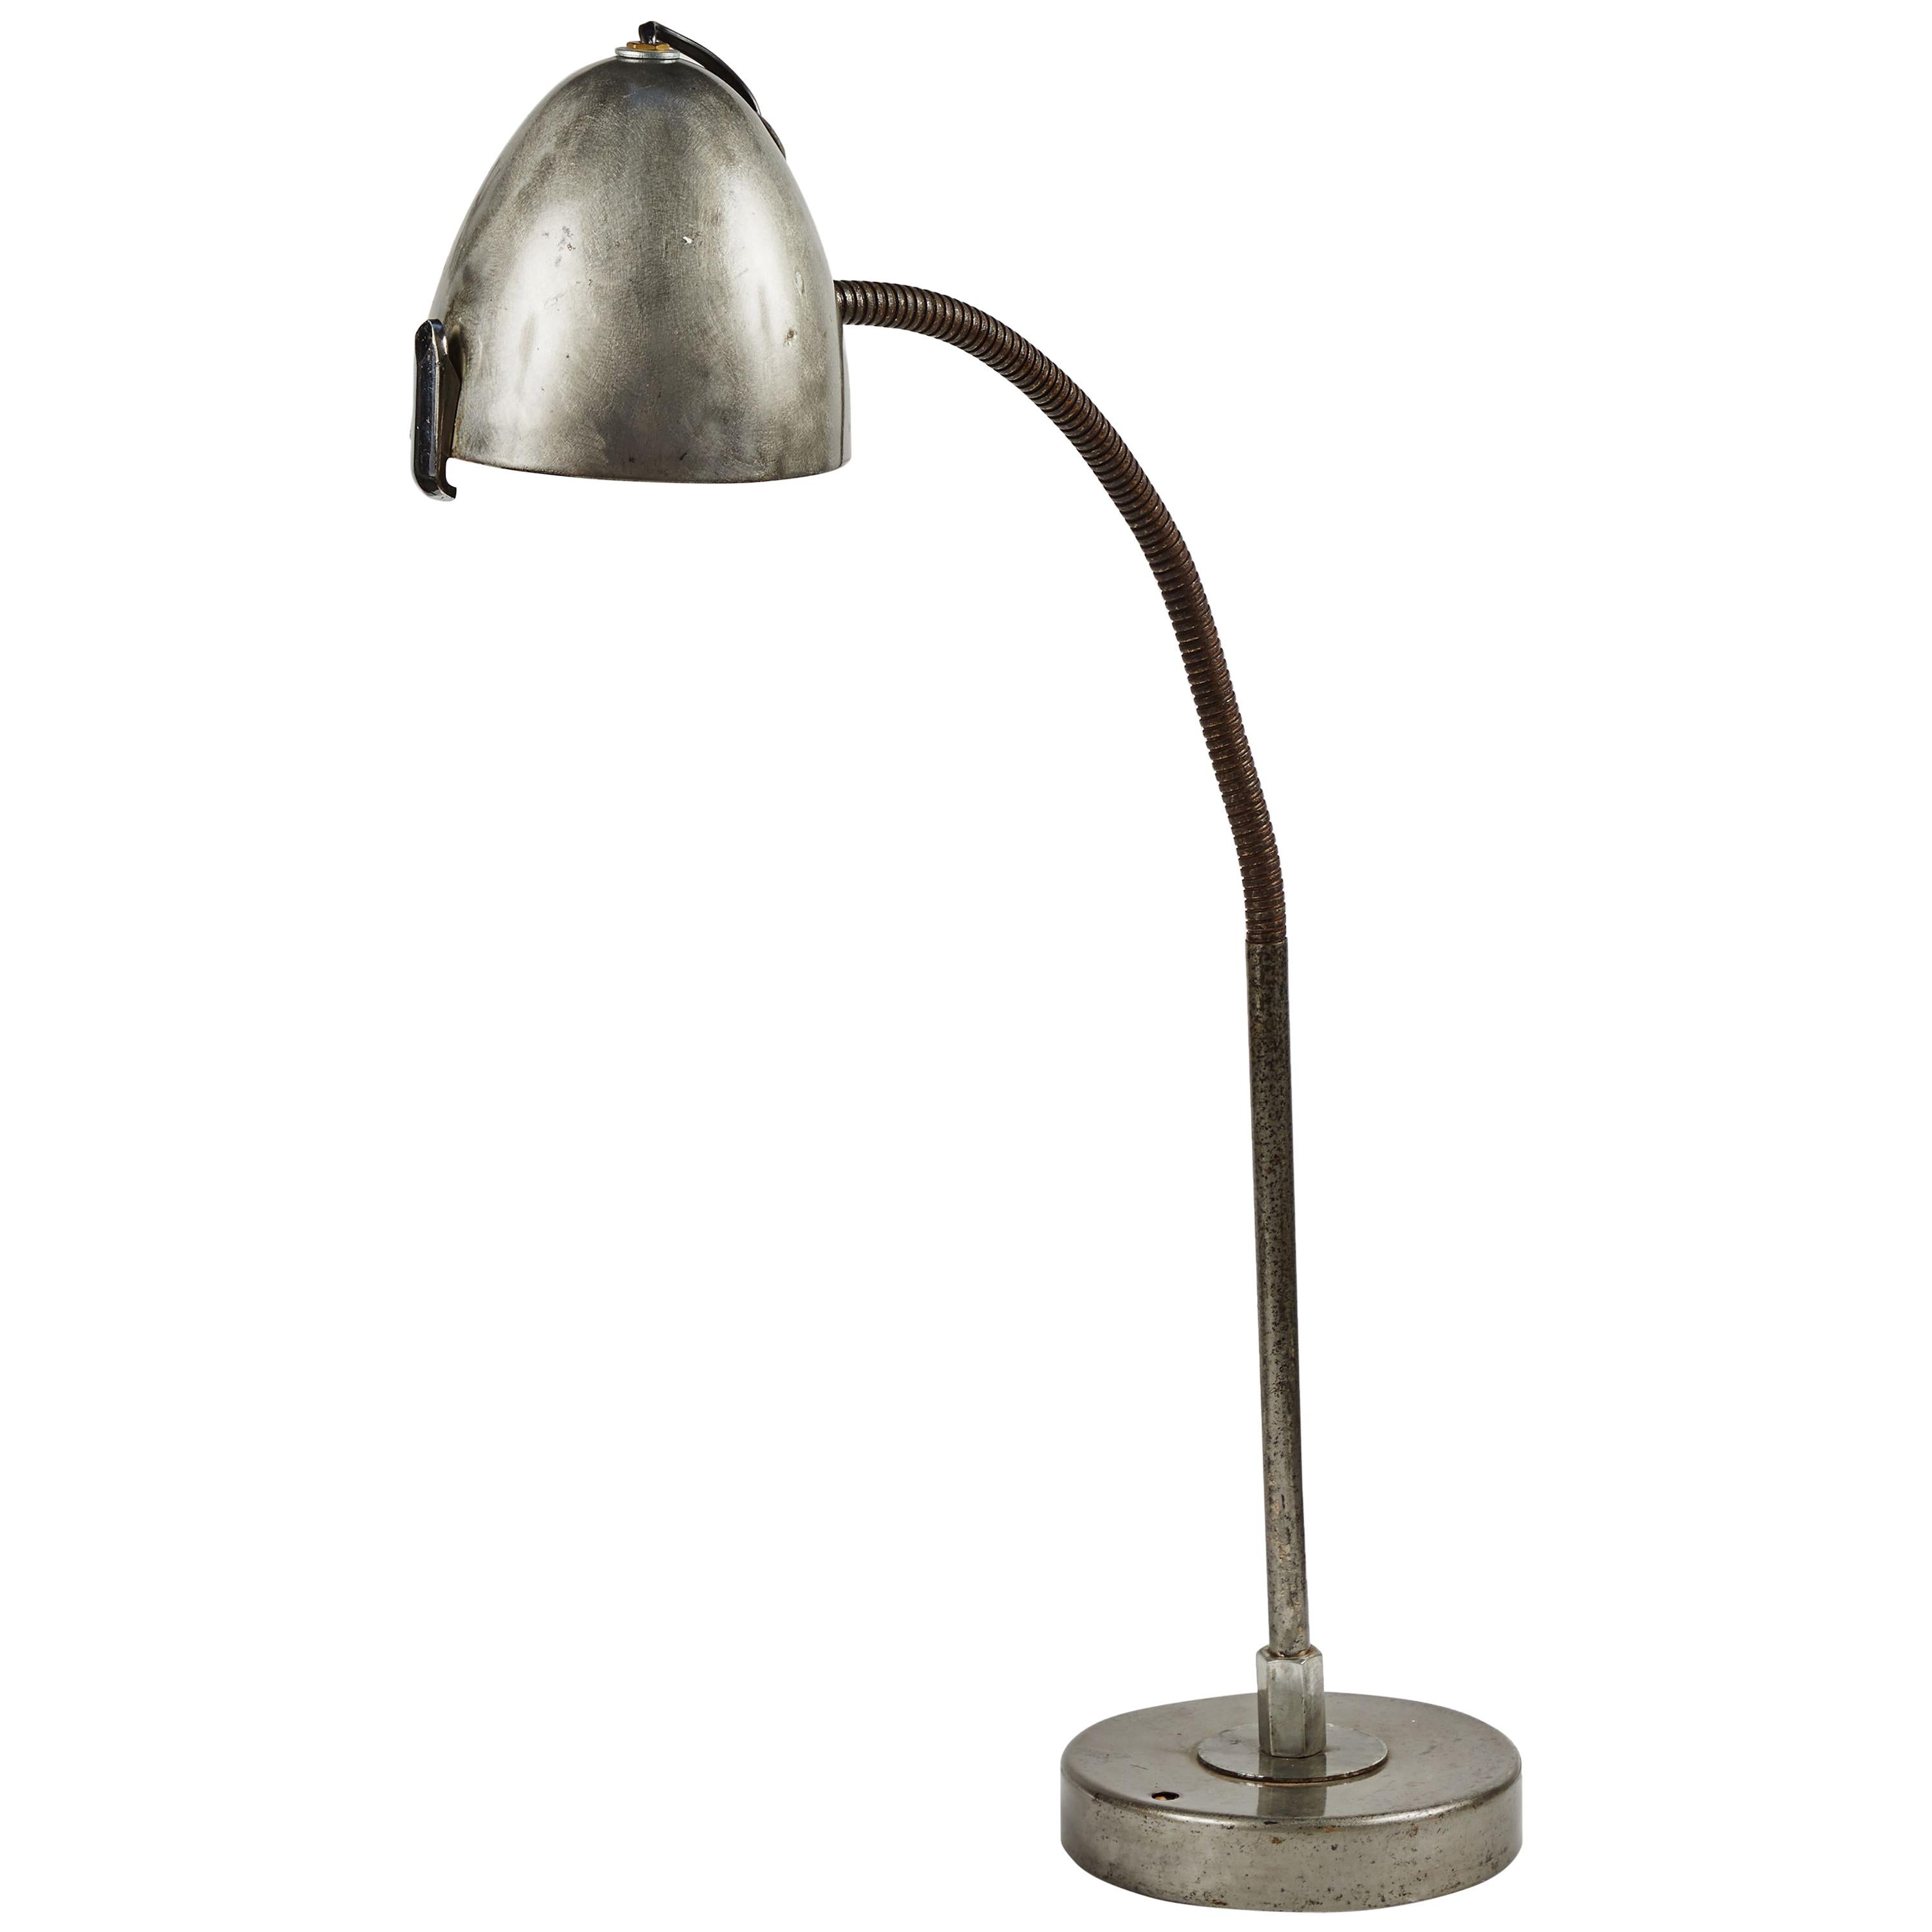 1940s Mid-Century Adjustable Metal Desk Lamp from France